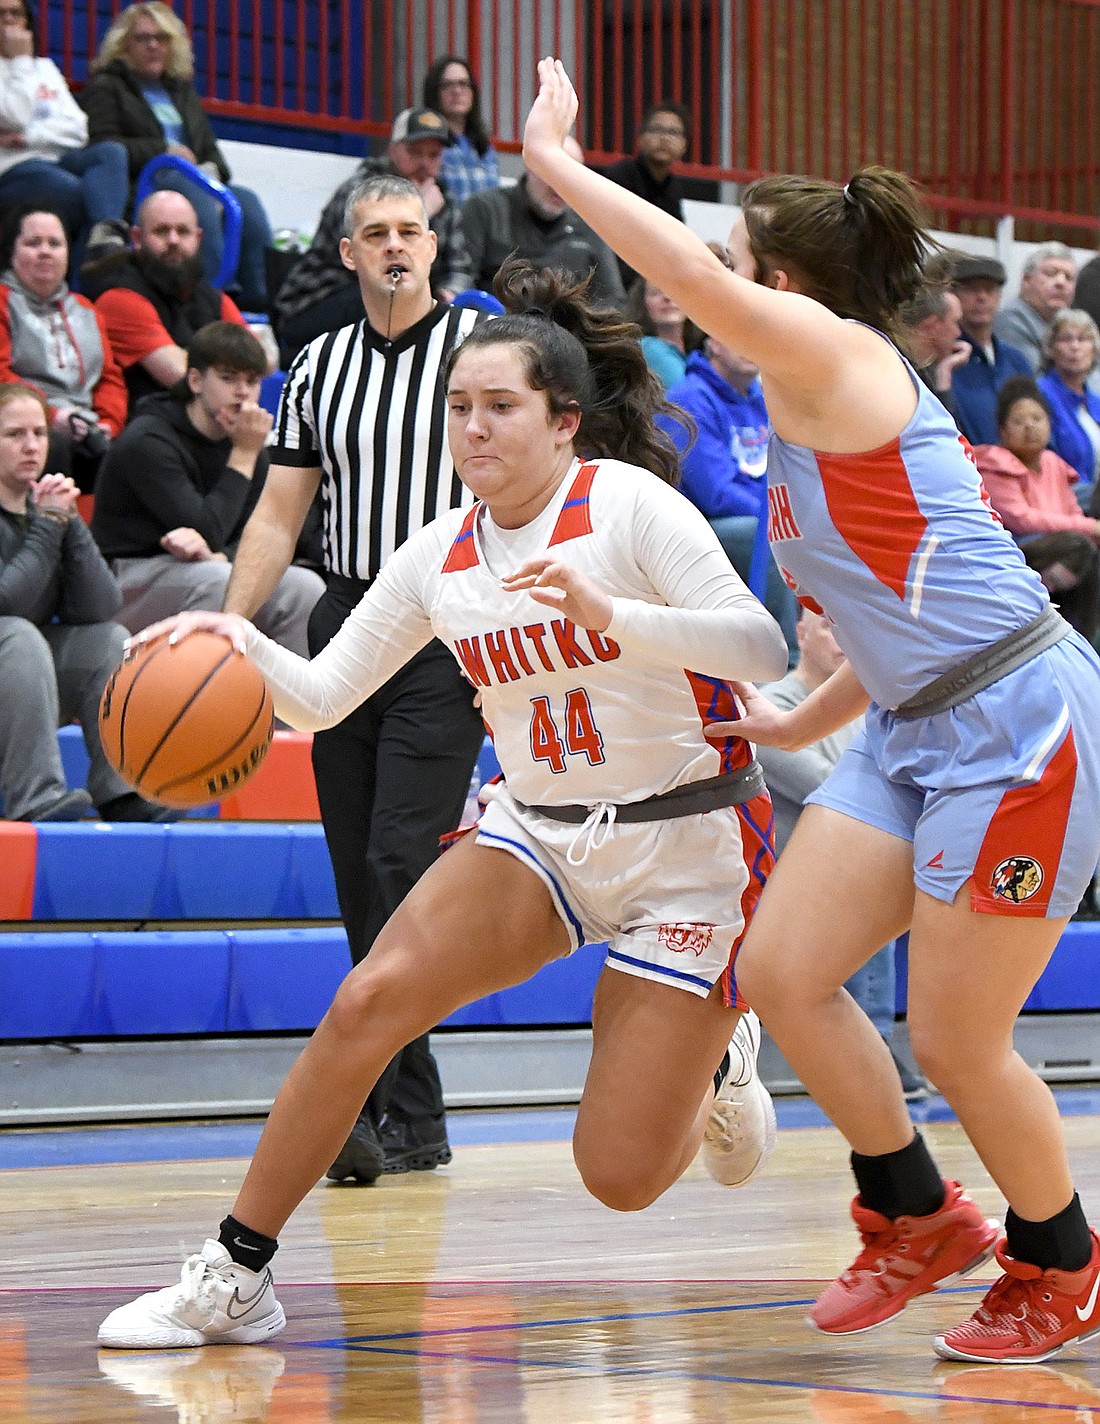 Whitko junior Adryianna Phillips drives to the basket during Thursday night's home game against Maconaquah. Photo by Gary Nieter